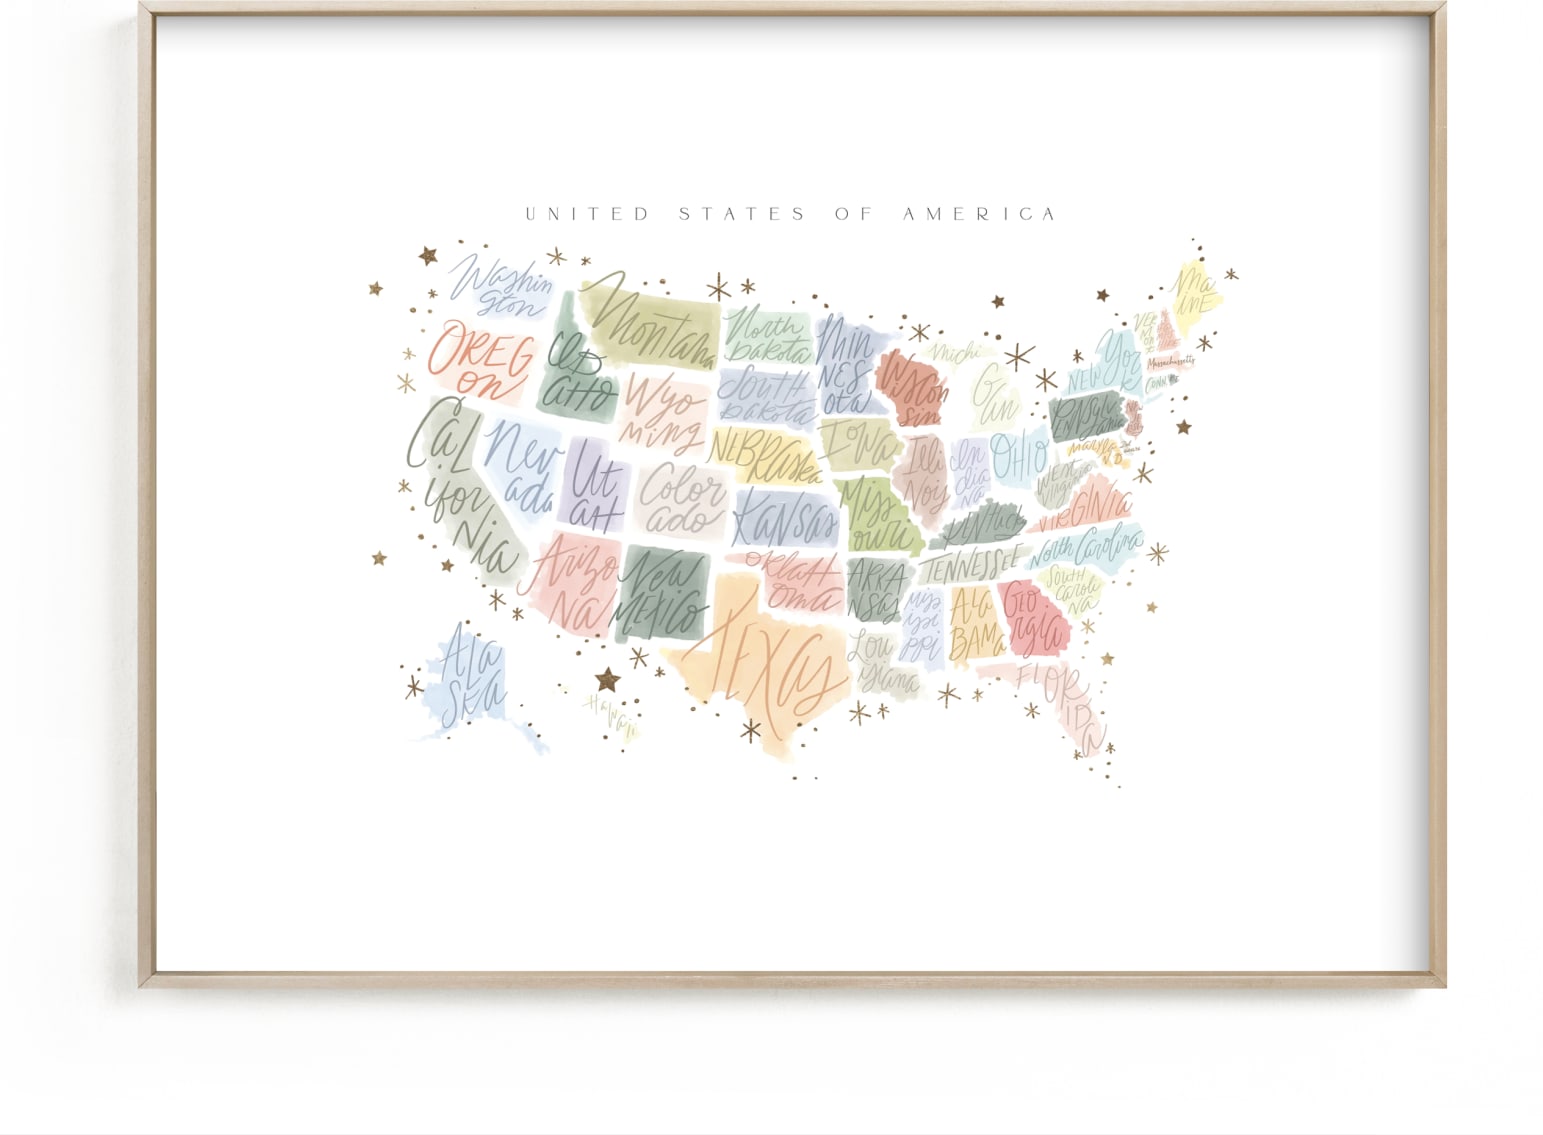 This is a colorful art by Hannah Williams called United States lettered.